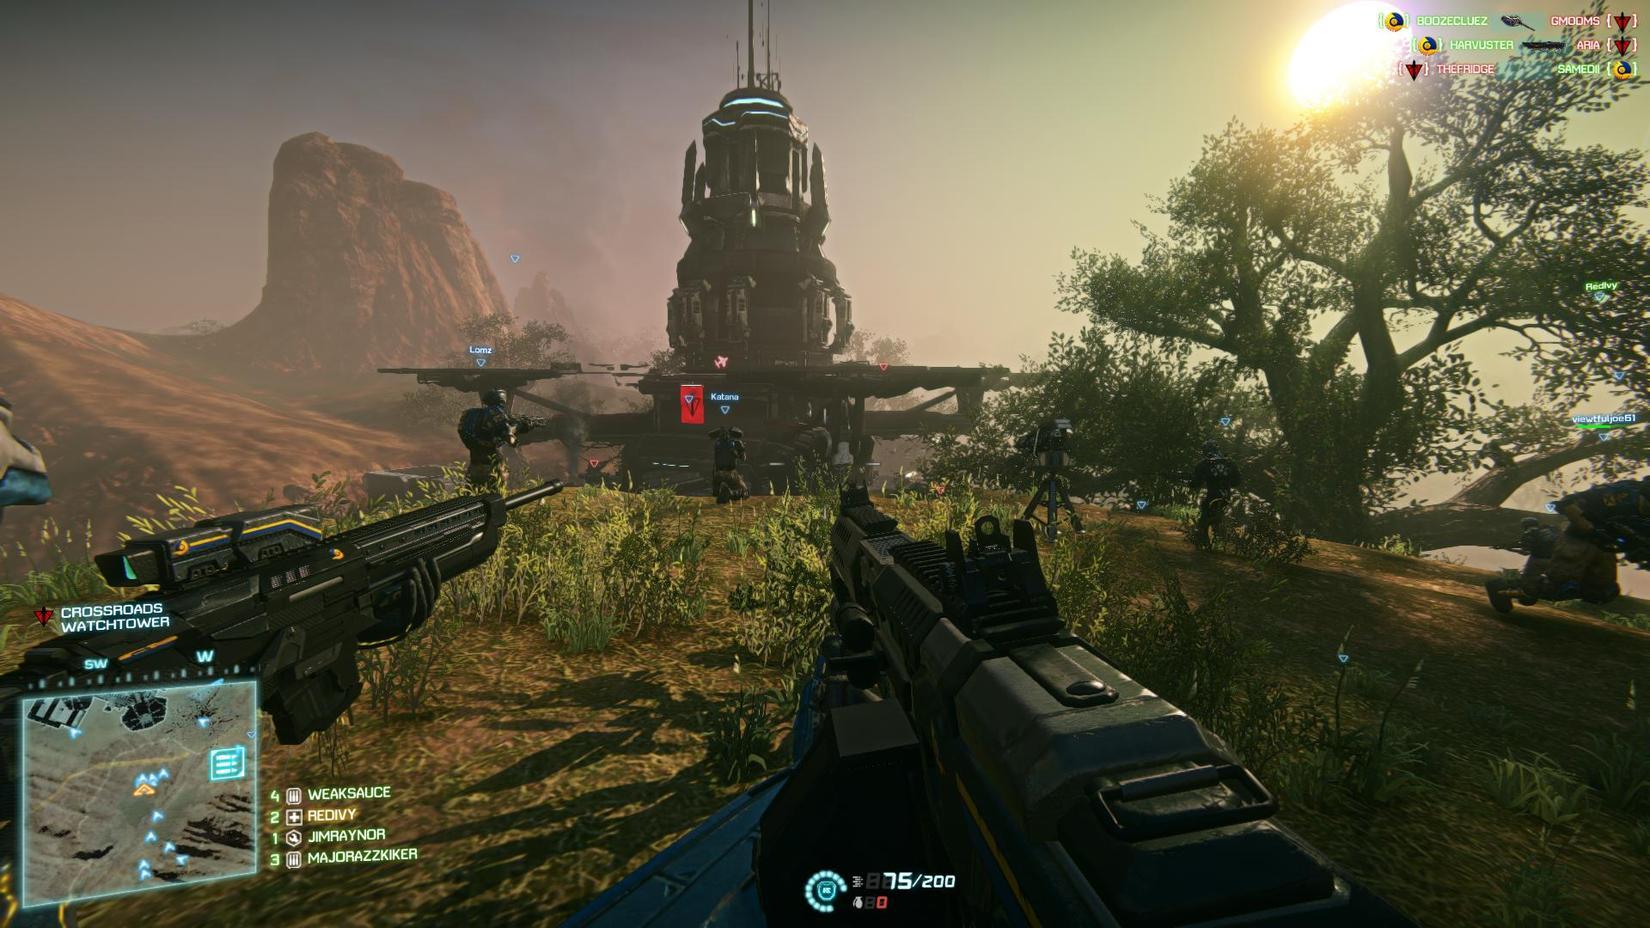 S&S; News: PlanetSide 2 On PS4 Is 'Basically PC Version On Max Settings'